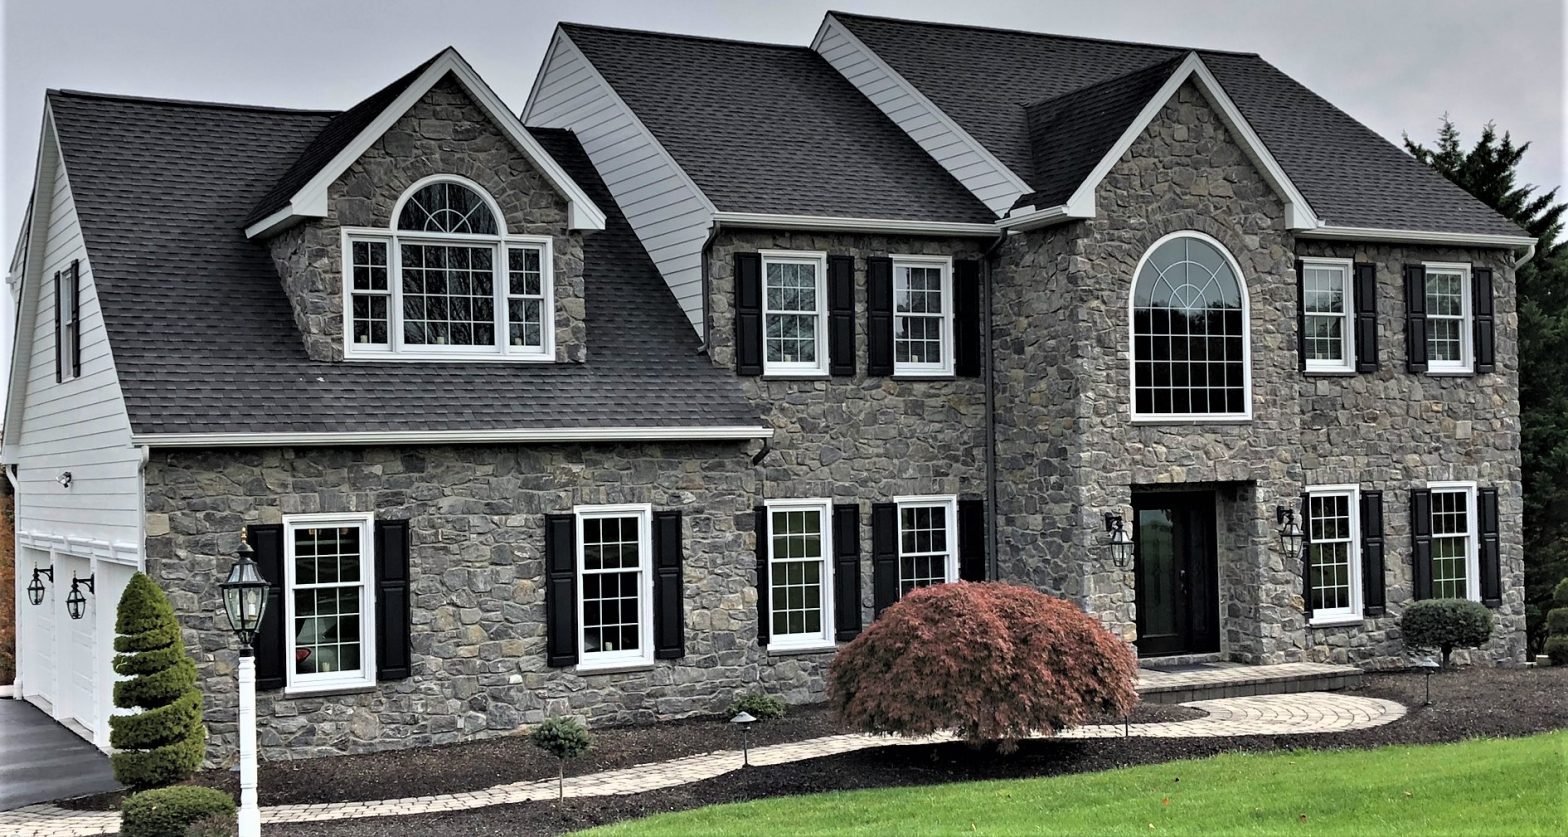 A large home with a stone exterior and white windows with black shutters